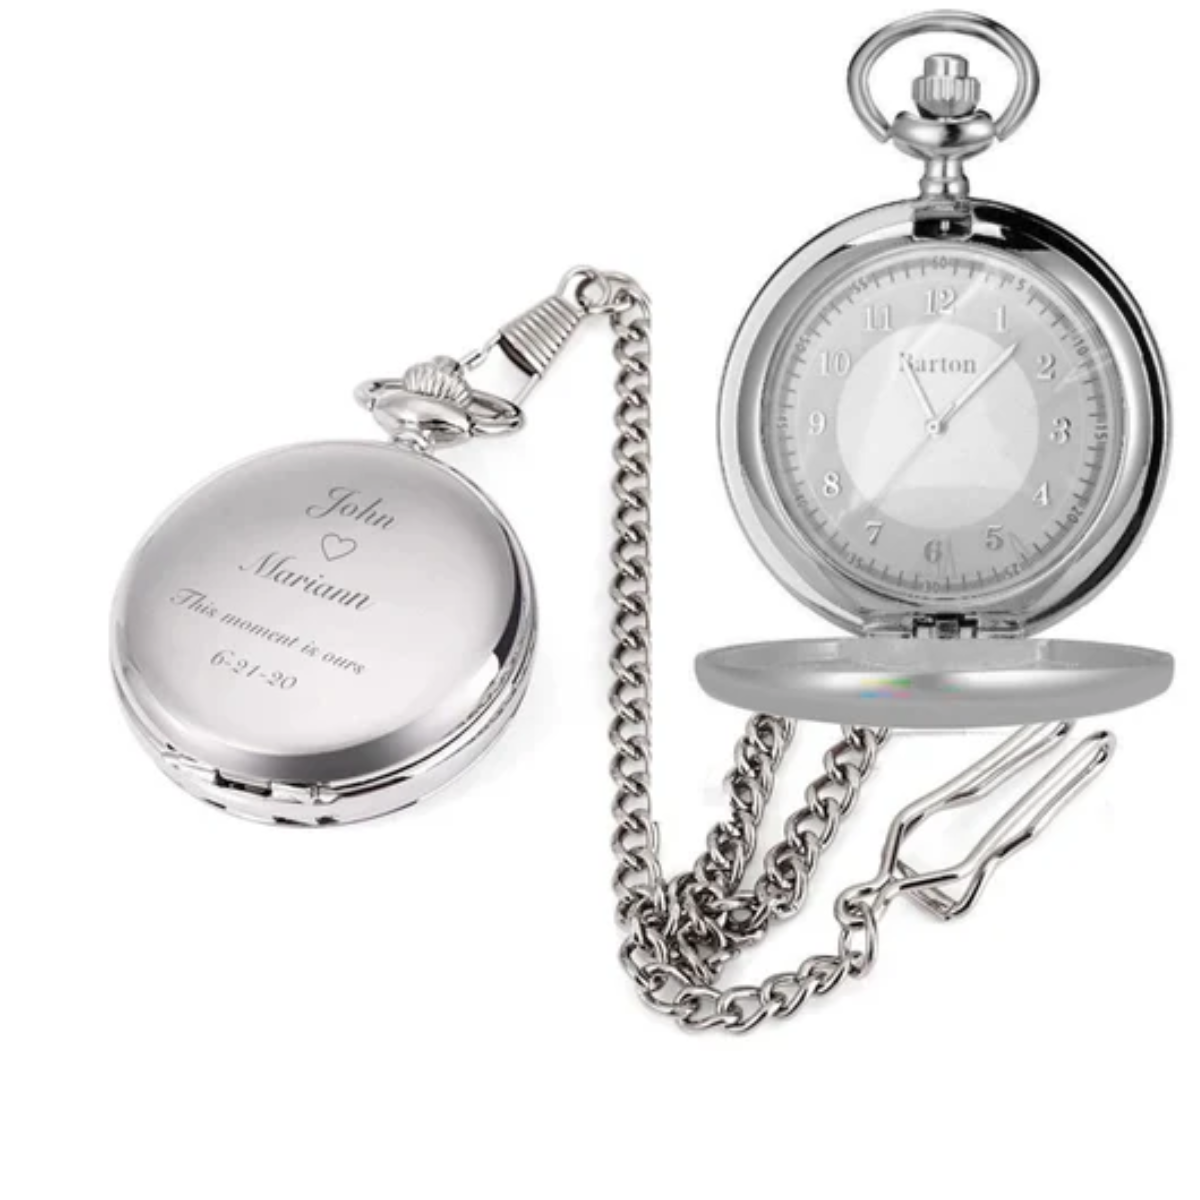 14. Timeless Love: Engraved Pocket Watch, the Perfect 10 Year Anniversary Gift for Him